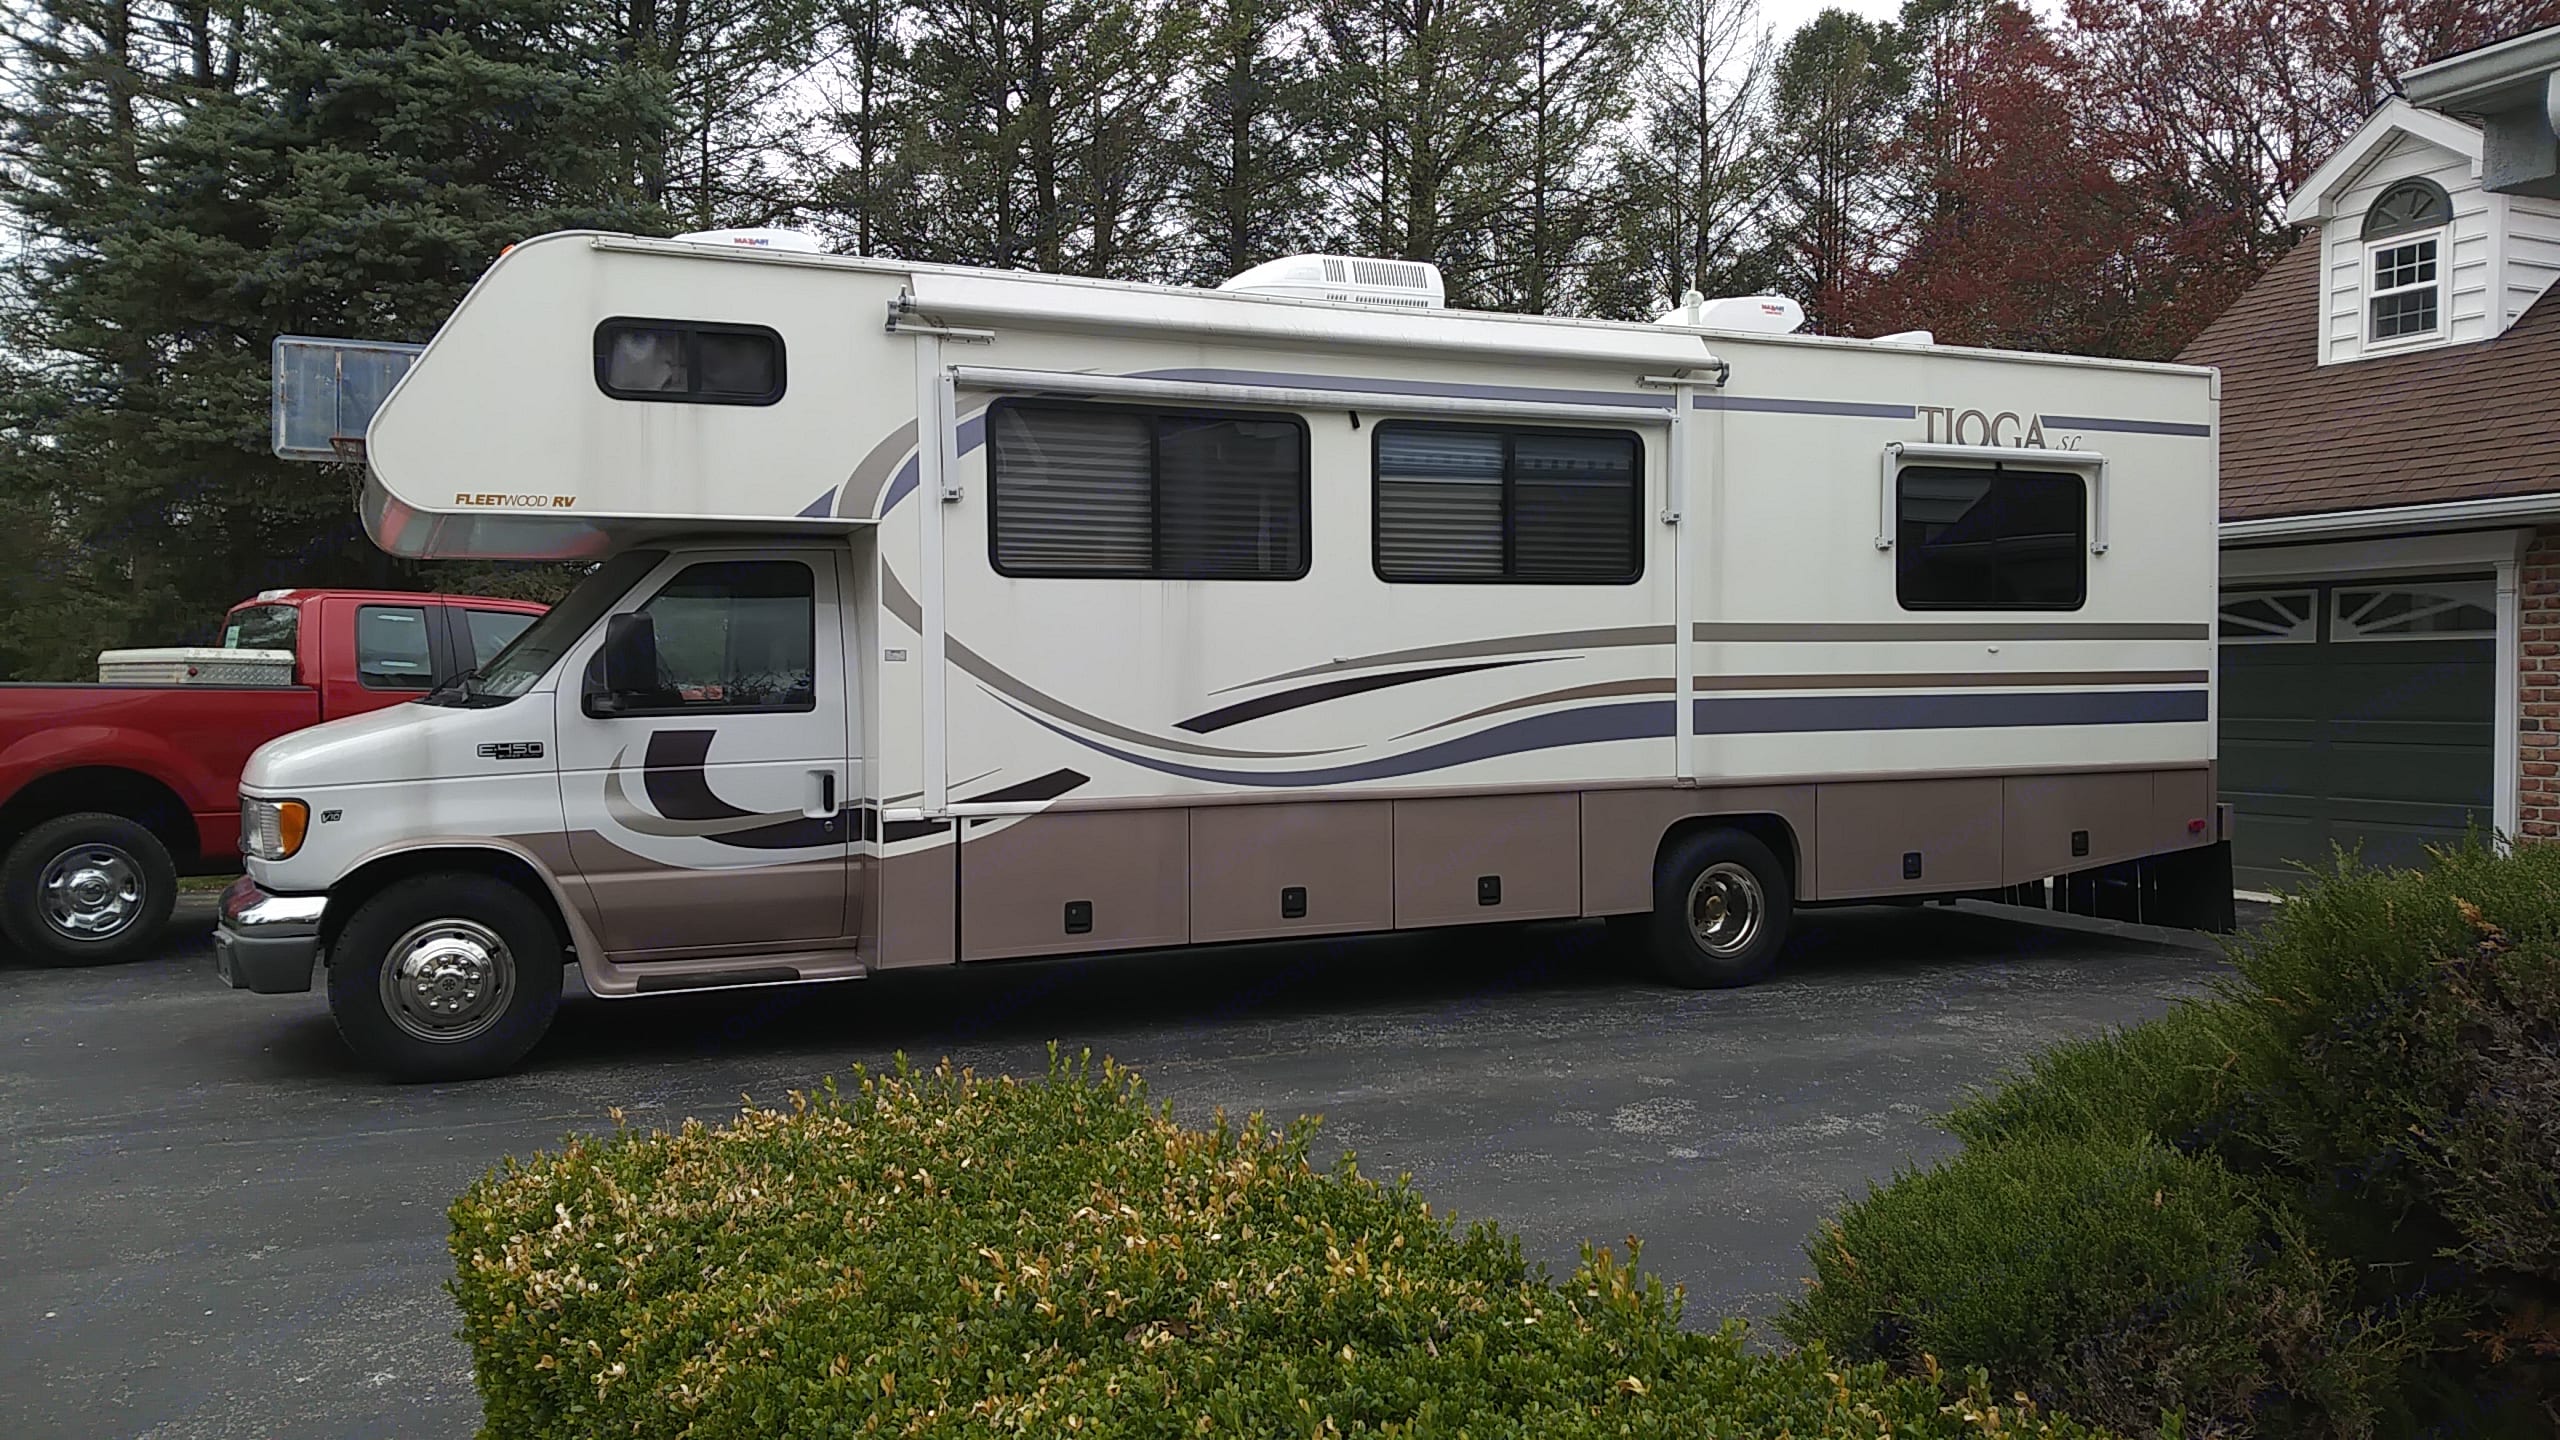 2000 Ford Tioga Class C Rental in Thomasville, PA | Outdoorsy